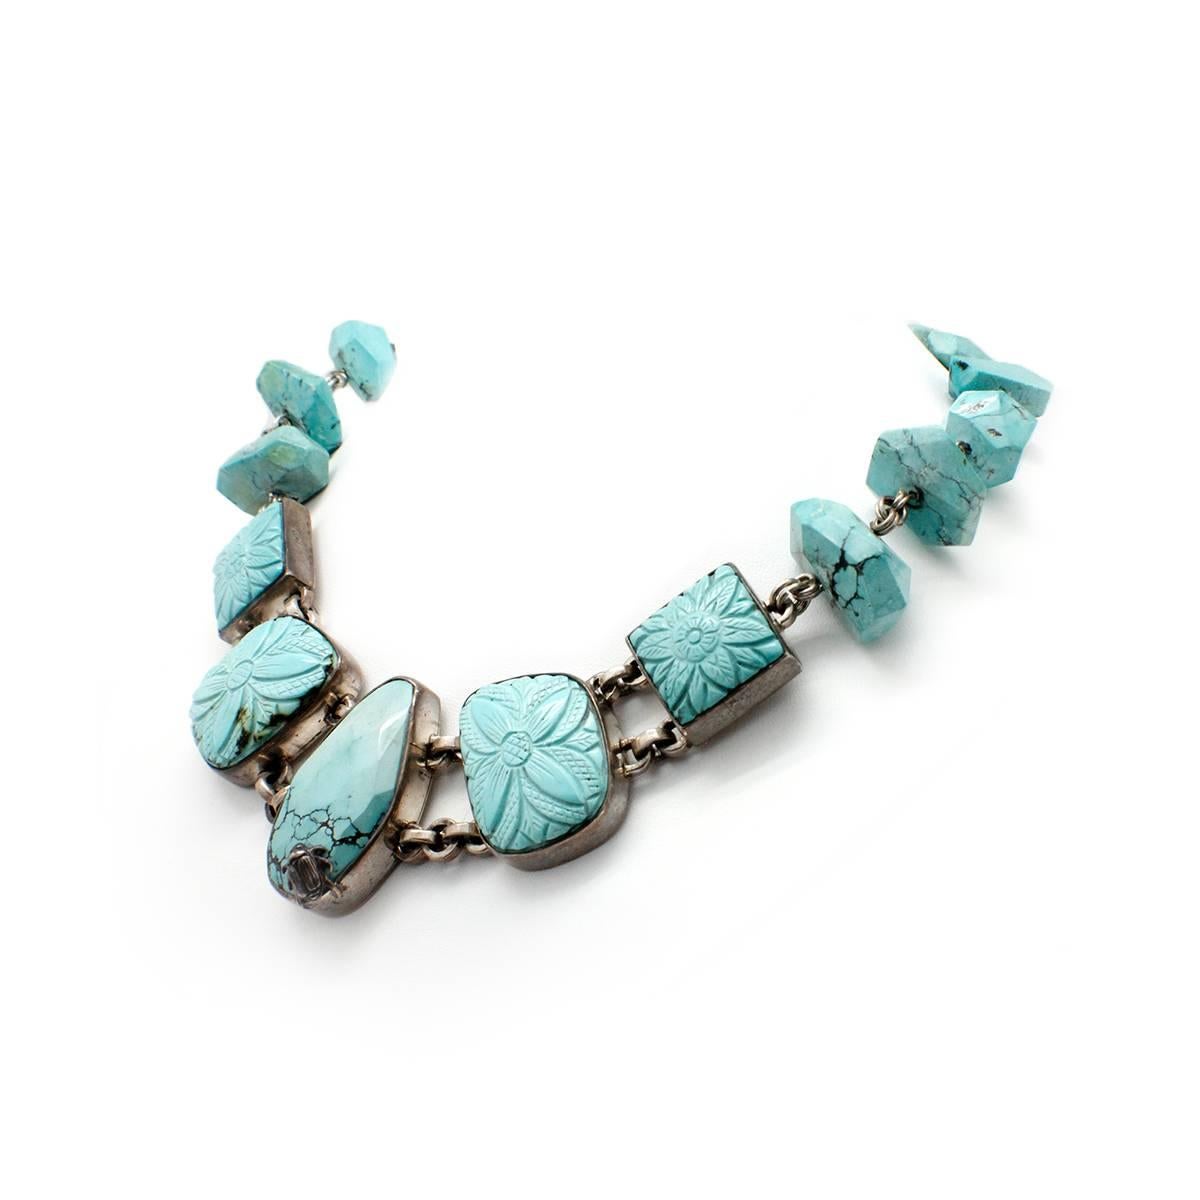 This one of a kind necklace is crafted with sterling silver by designer Stephen Dweck. The necklace is designed with bezel set turquoise carved with floral designs, as well as faceted turquoise pieces throughout. The necklace measures 40mm at its